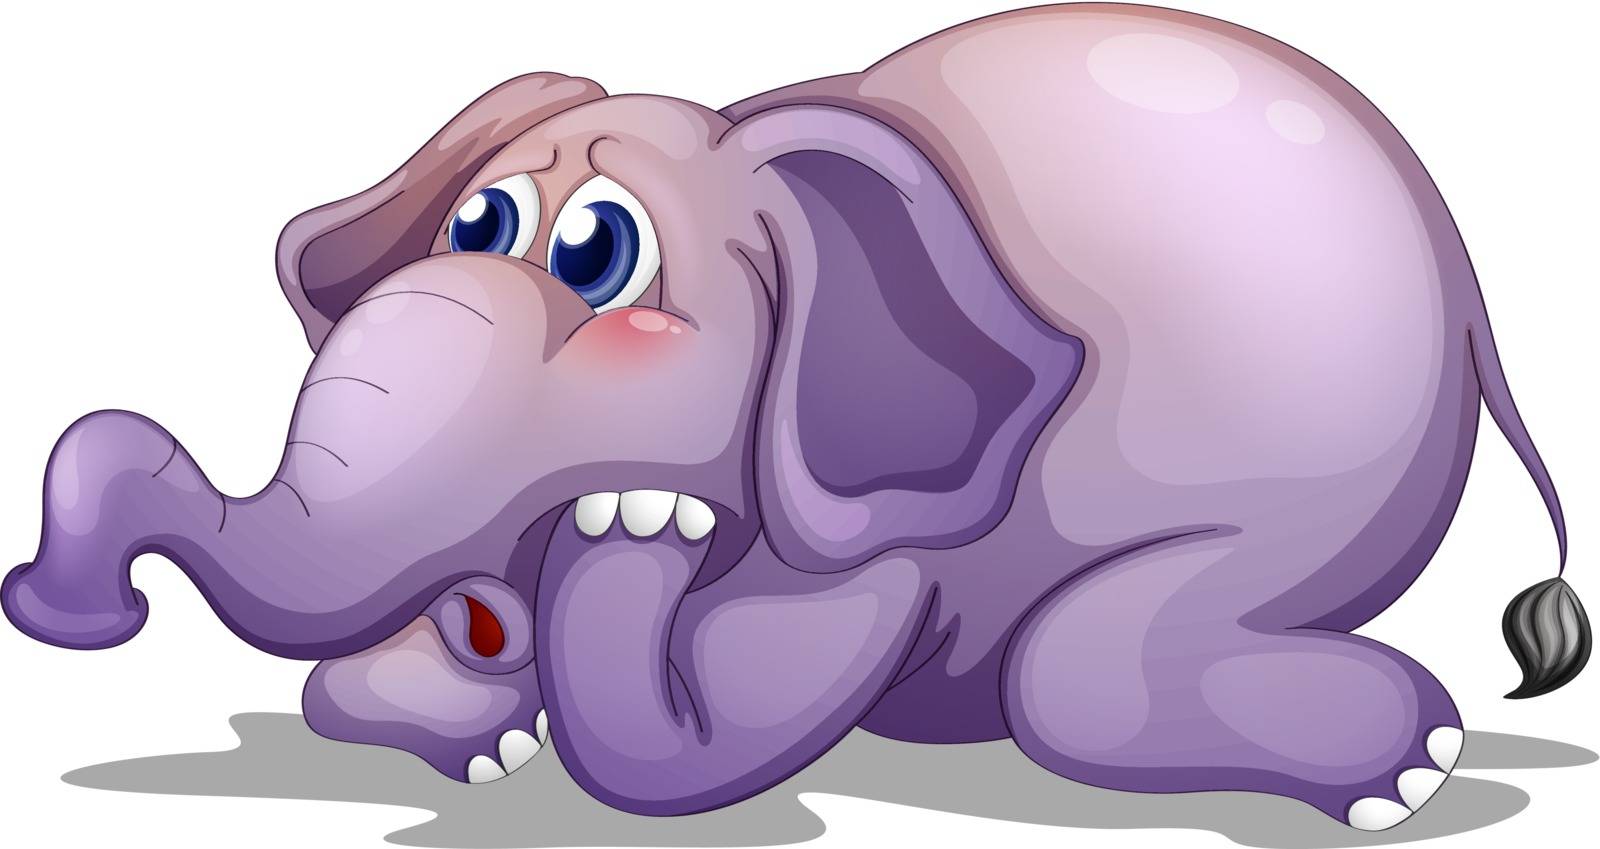 Illustration of a big gray elephant on a white background